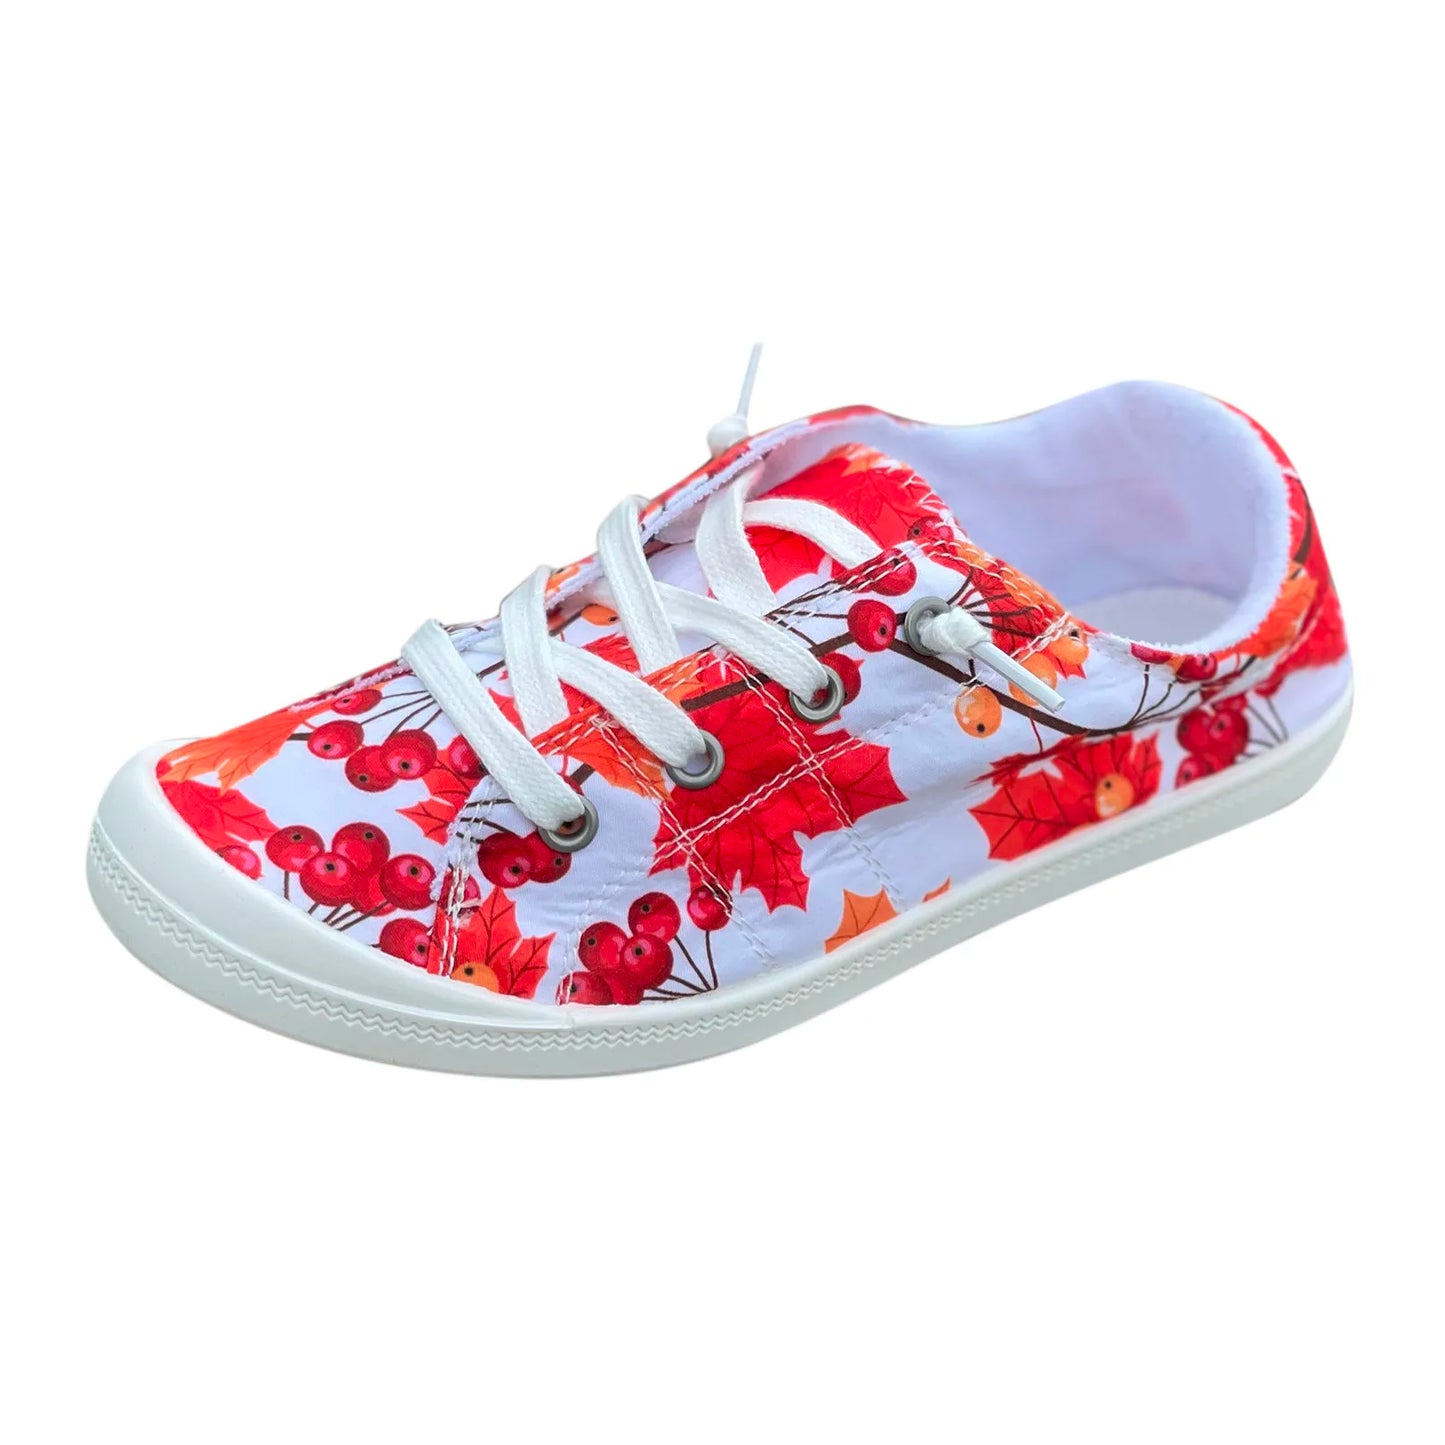 Womens Sports Shoes Sneakers Leaf Pumpkin Pattern/Slip On Shoes Low Top Shoes Soft Sole